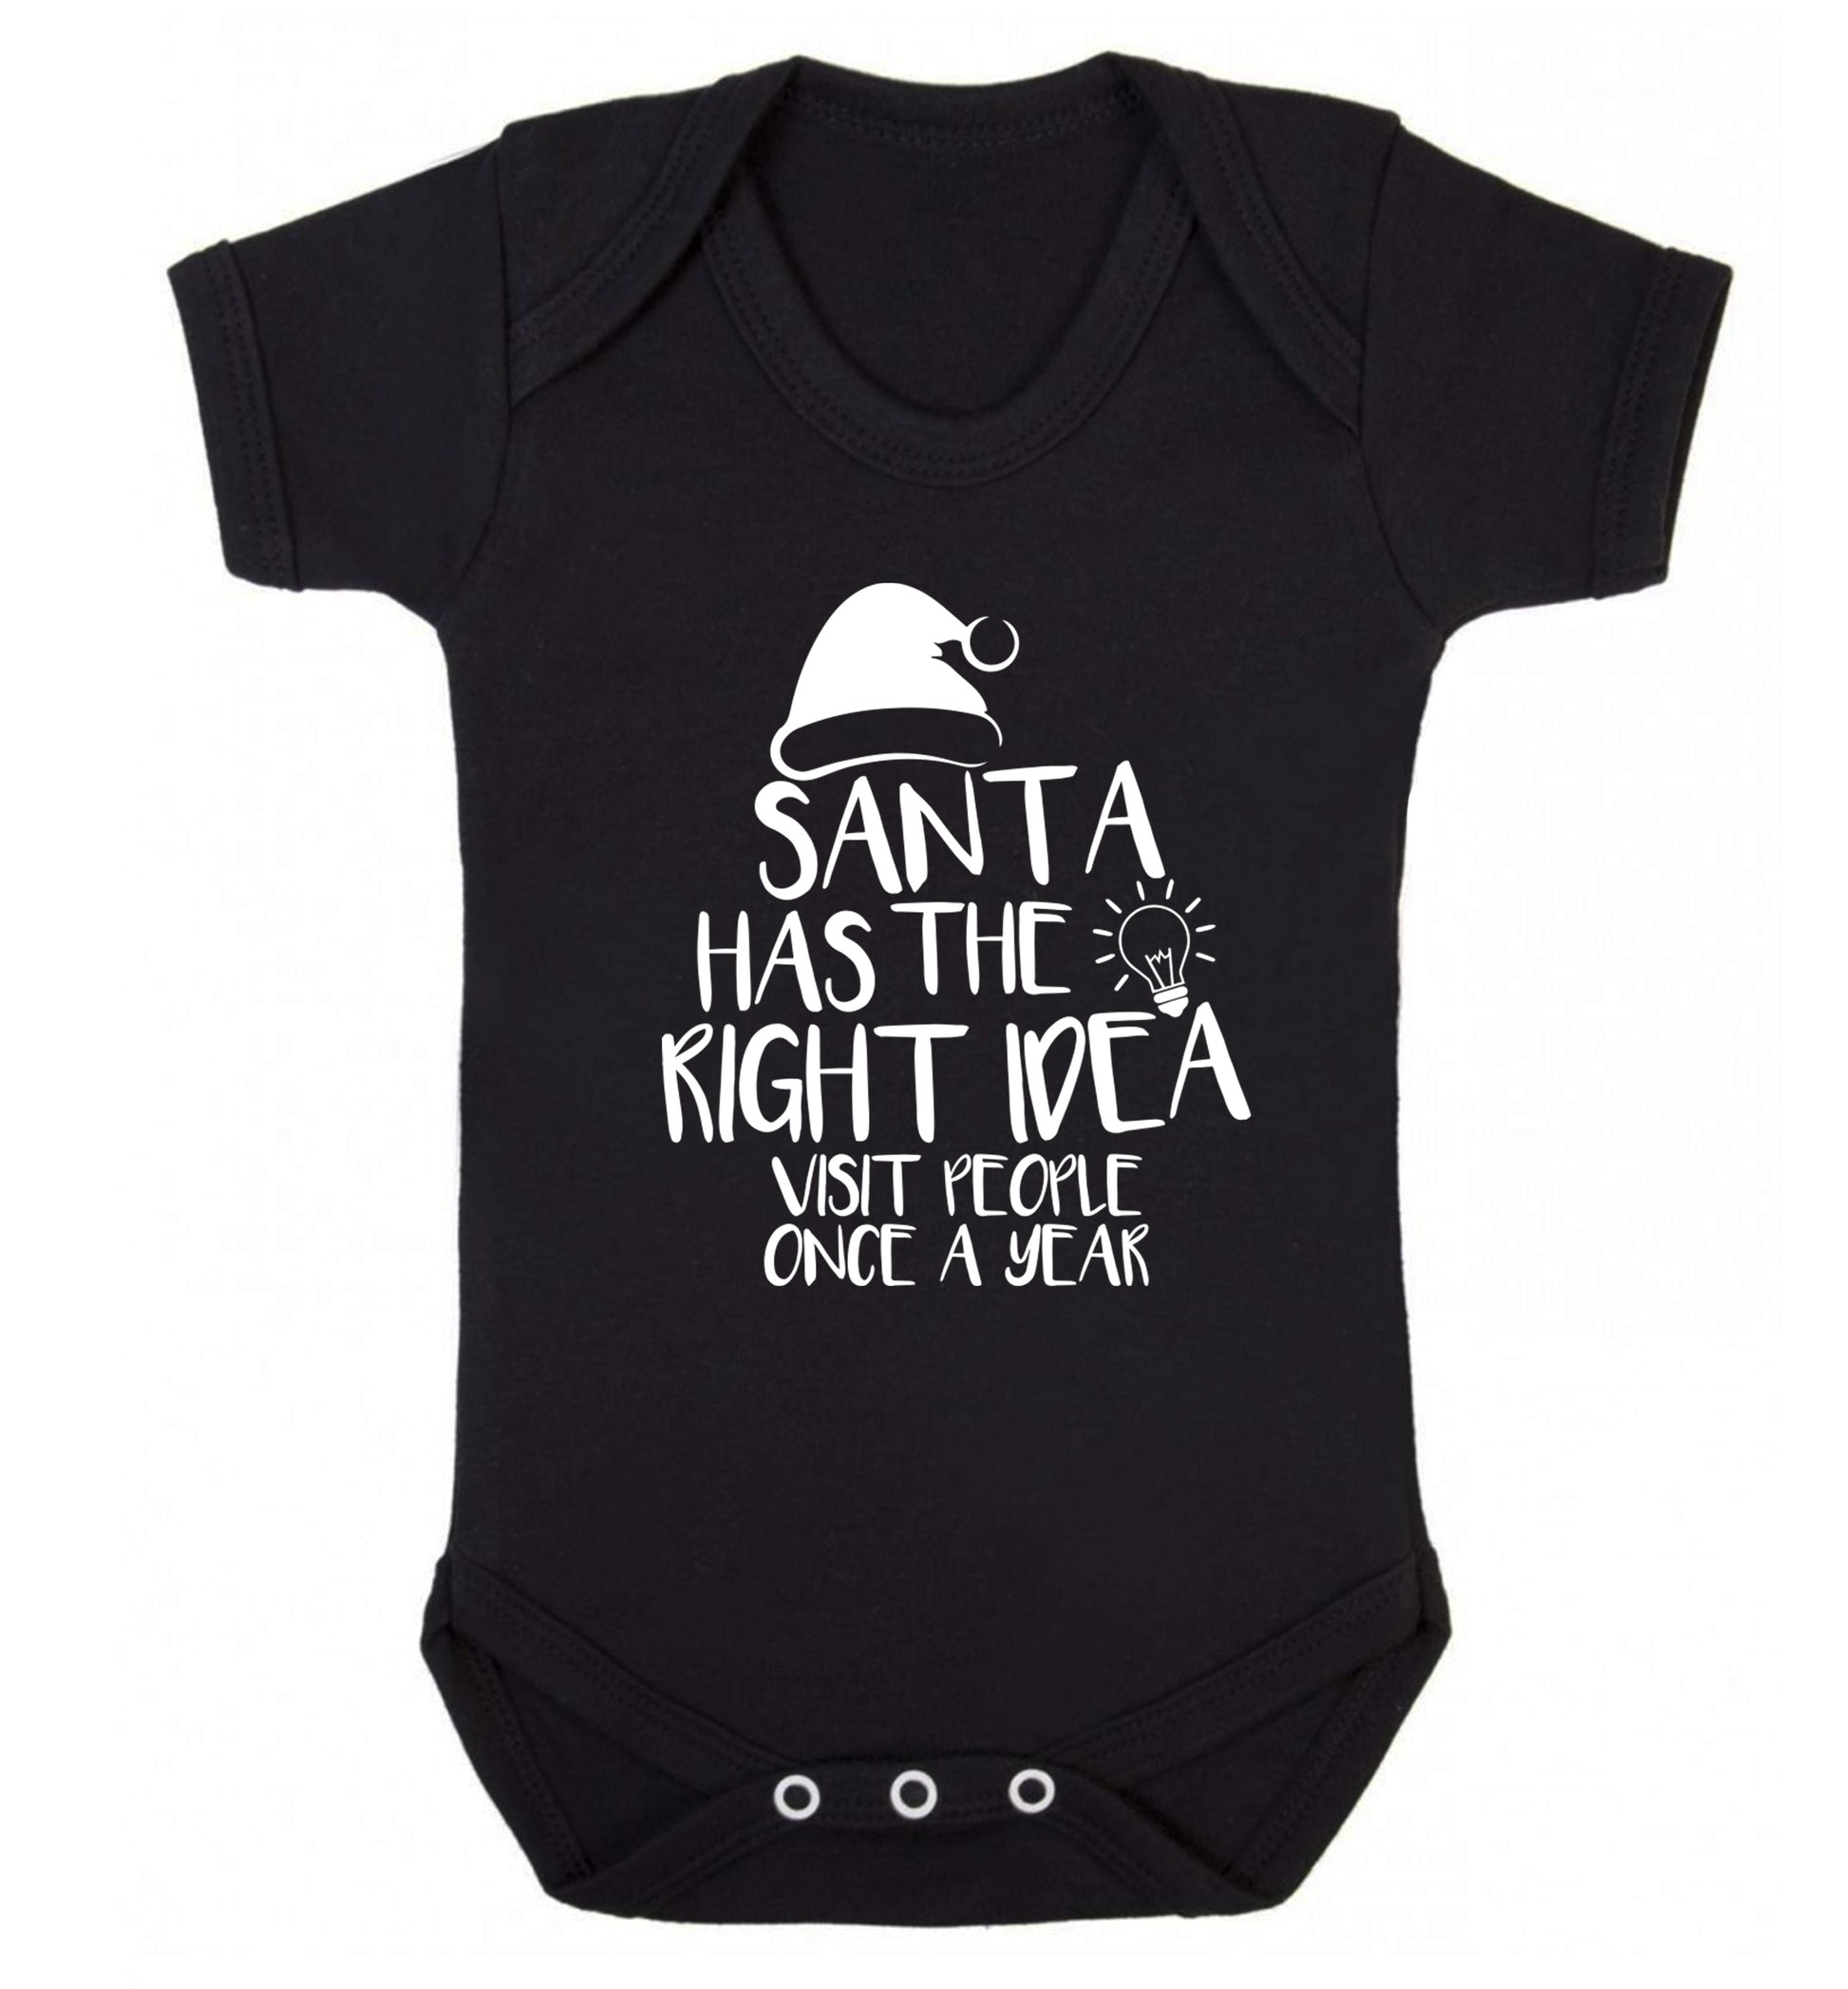 Santa has the right idea visit people once a year Baby Vest black 18-24 months